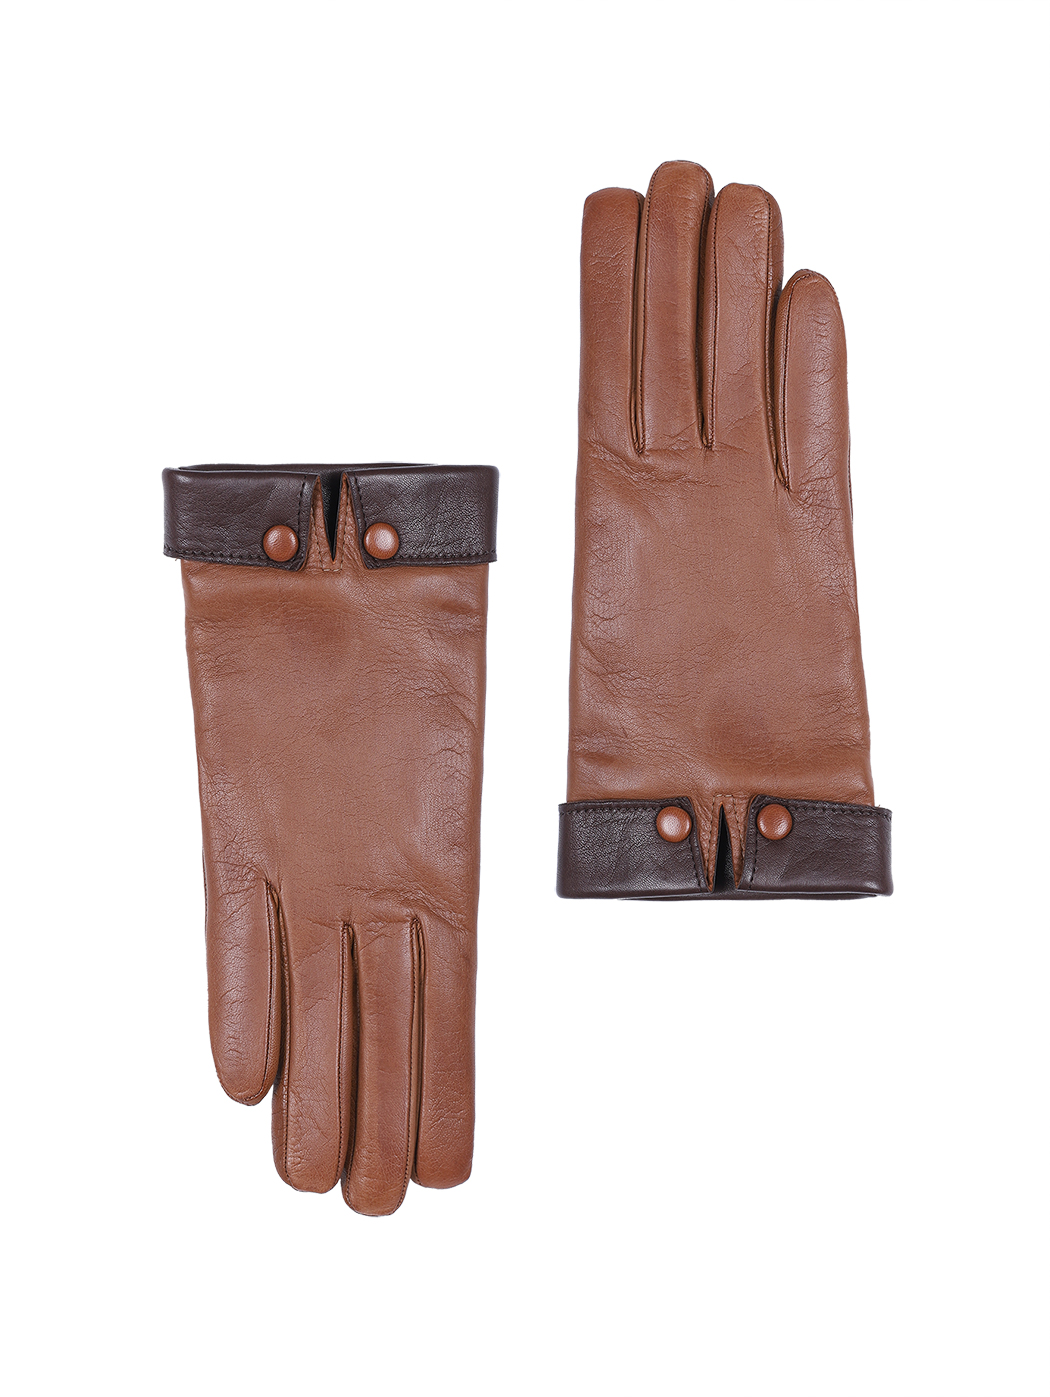 Women's Cashmere-lined Leather Gloves Camel/Mink Brown